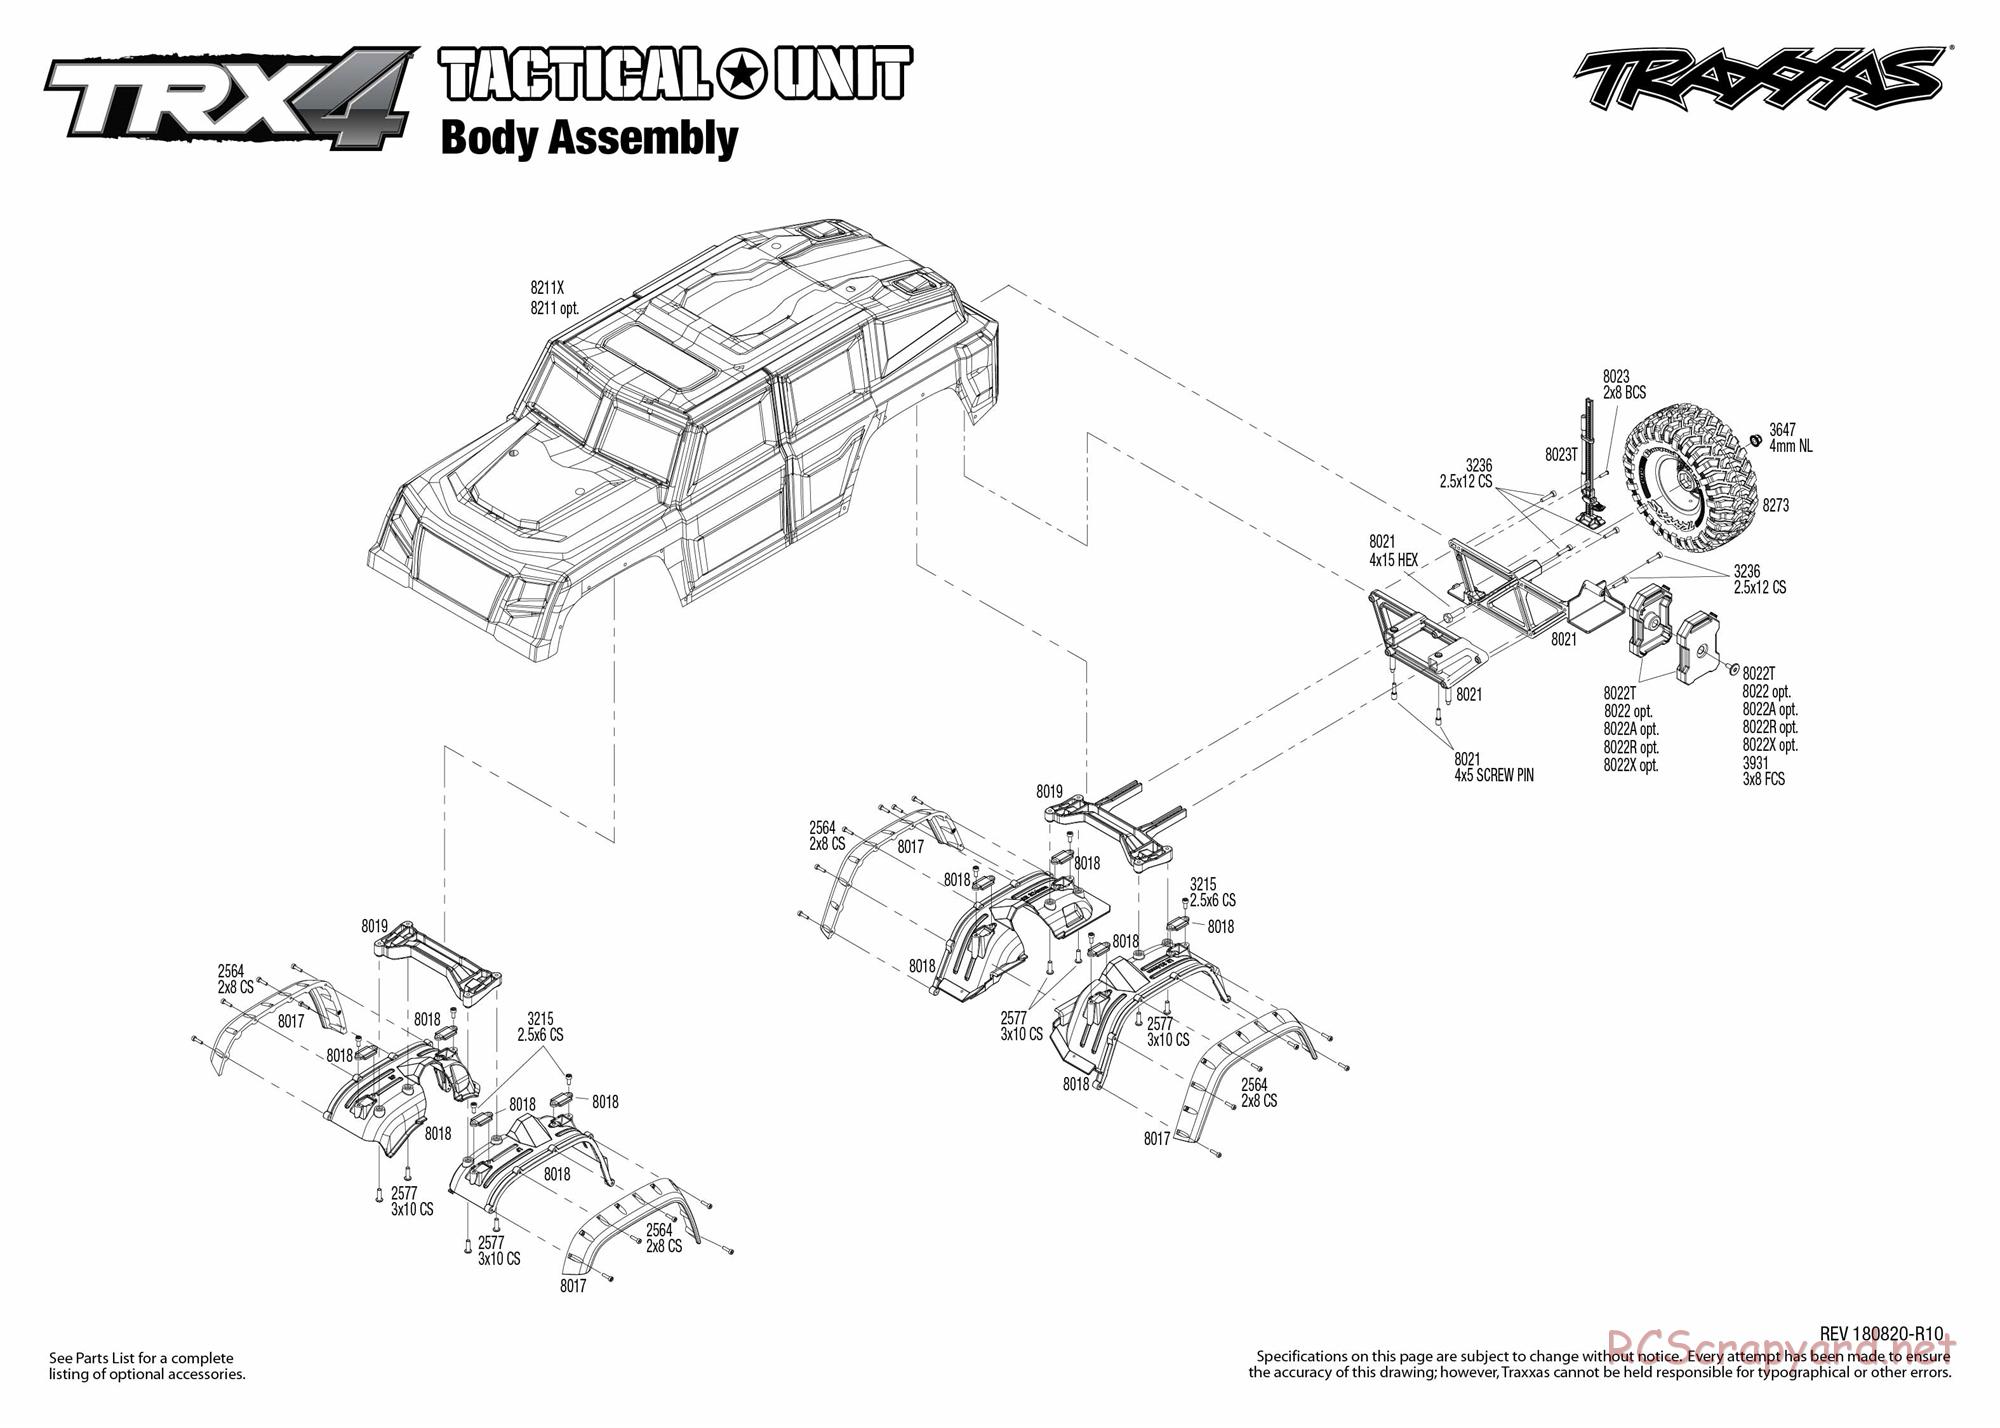 Traxxas - TRX-4 Tactical Unit (2018) - Exploded Views - Page 1